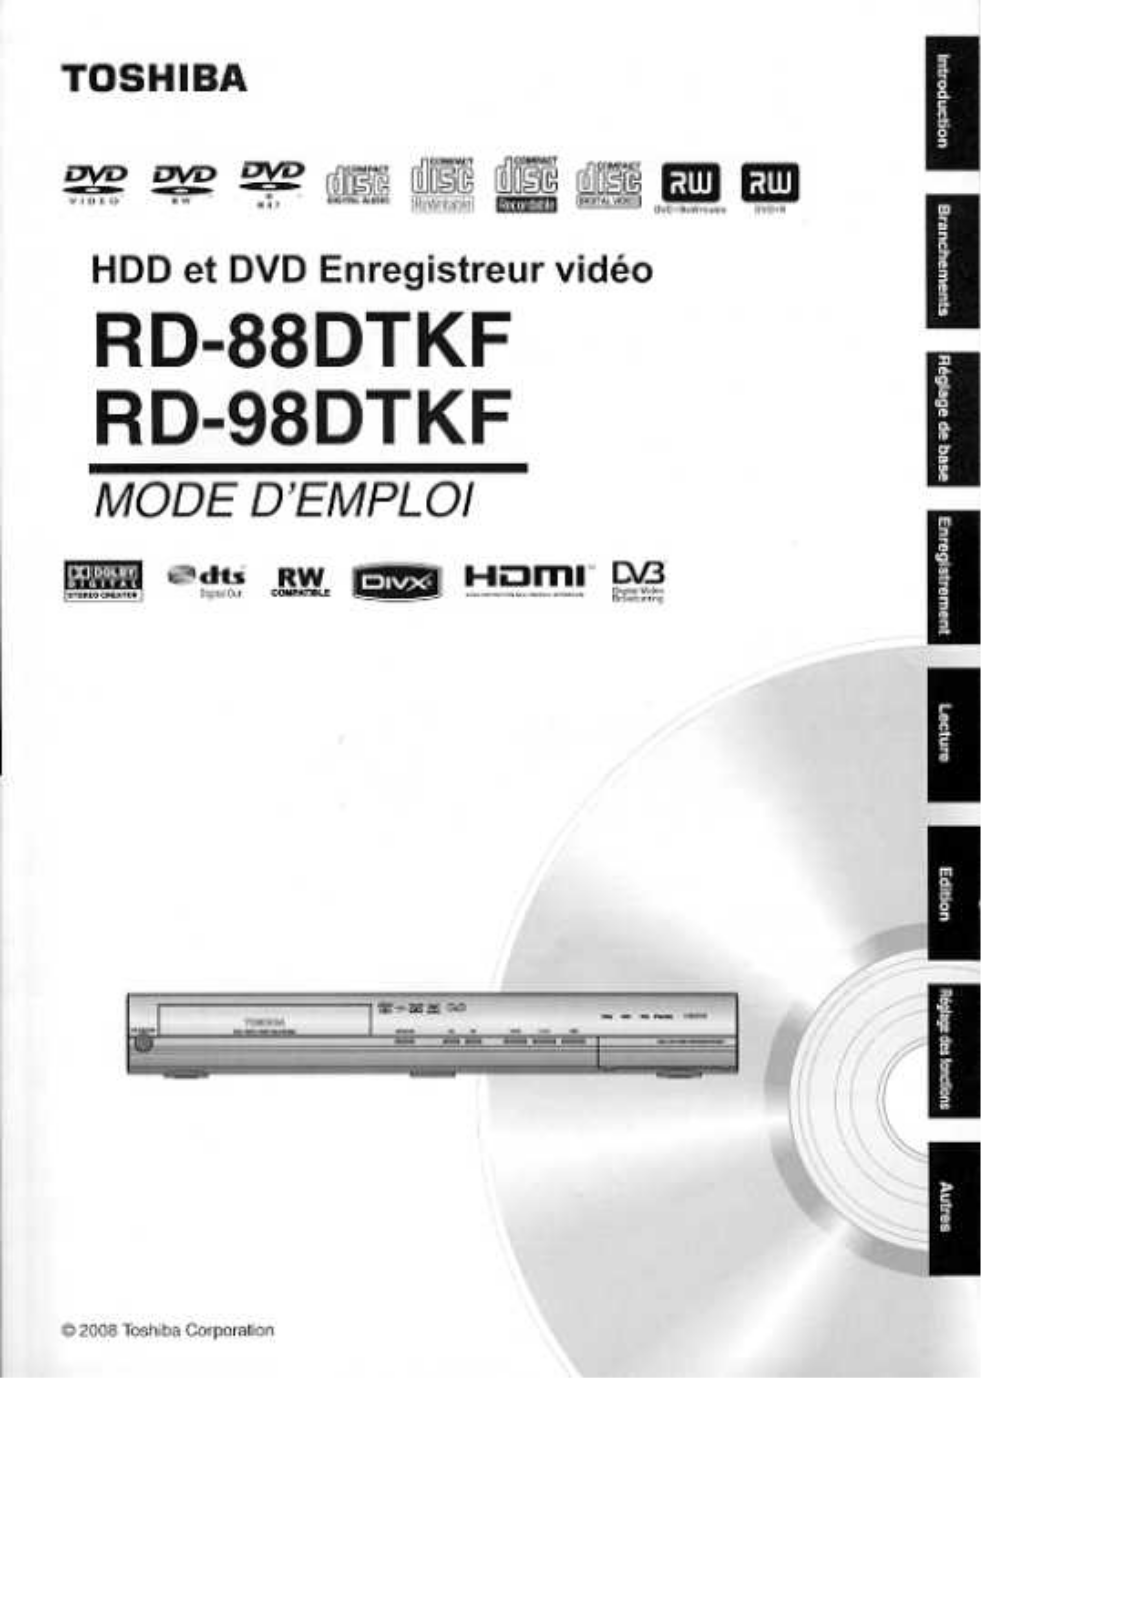 TOSHIBA RD-98DT User Manual